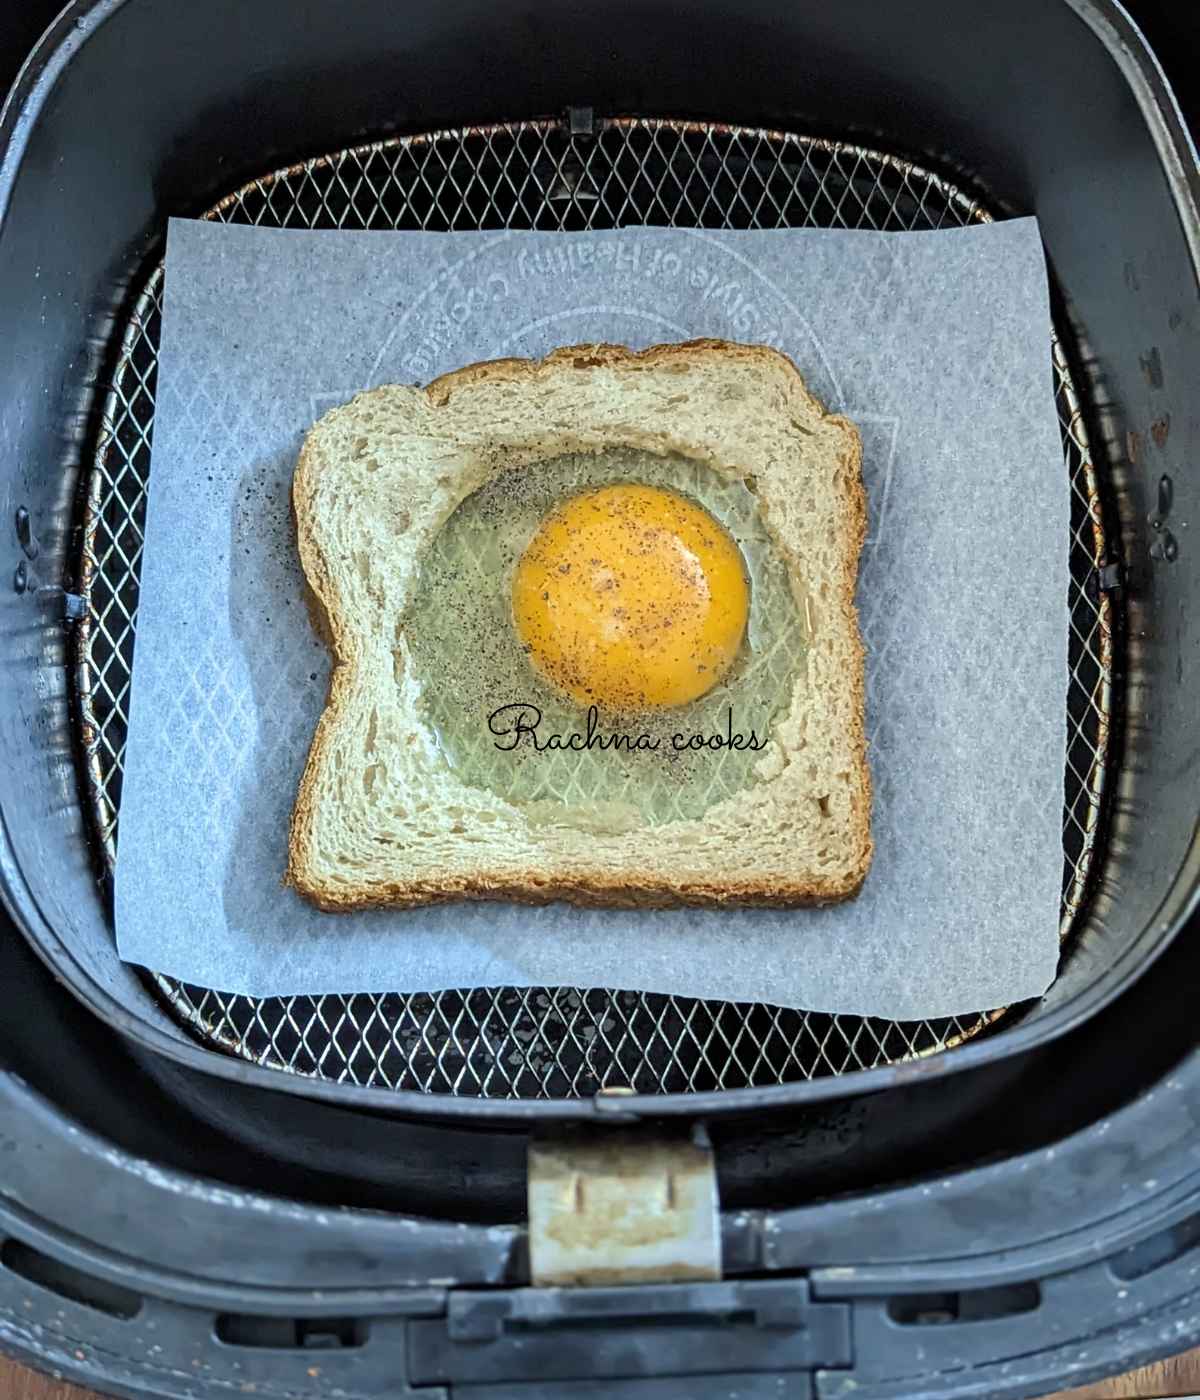 Bread with cavity cut out and with a broken egg with salt and pepper in air fryer basket.